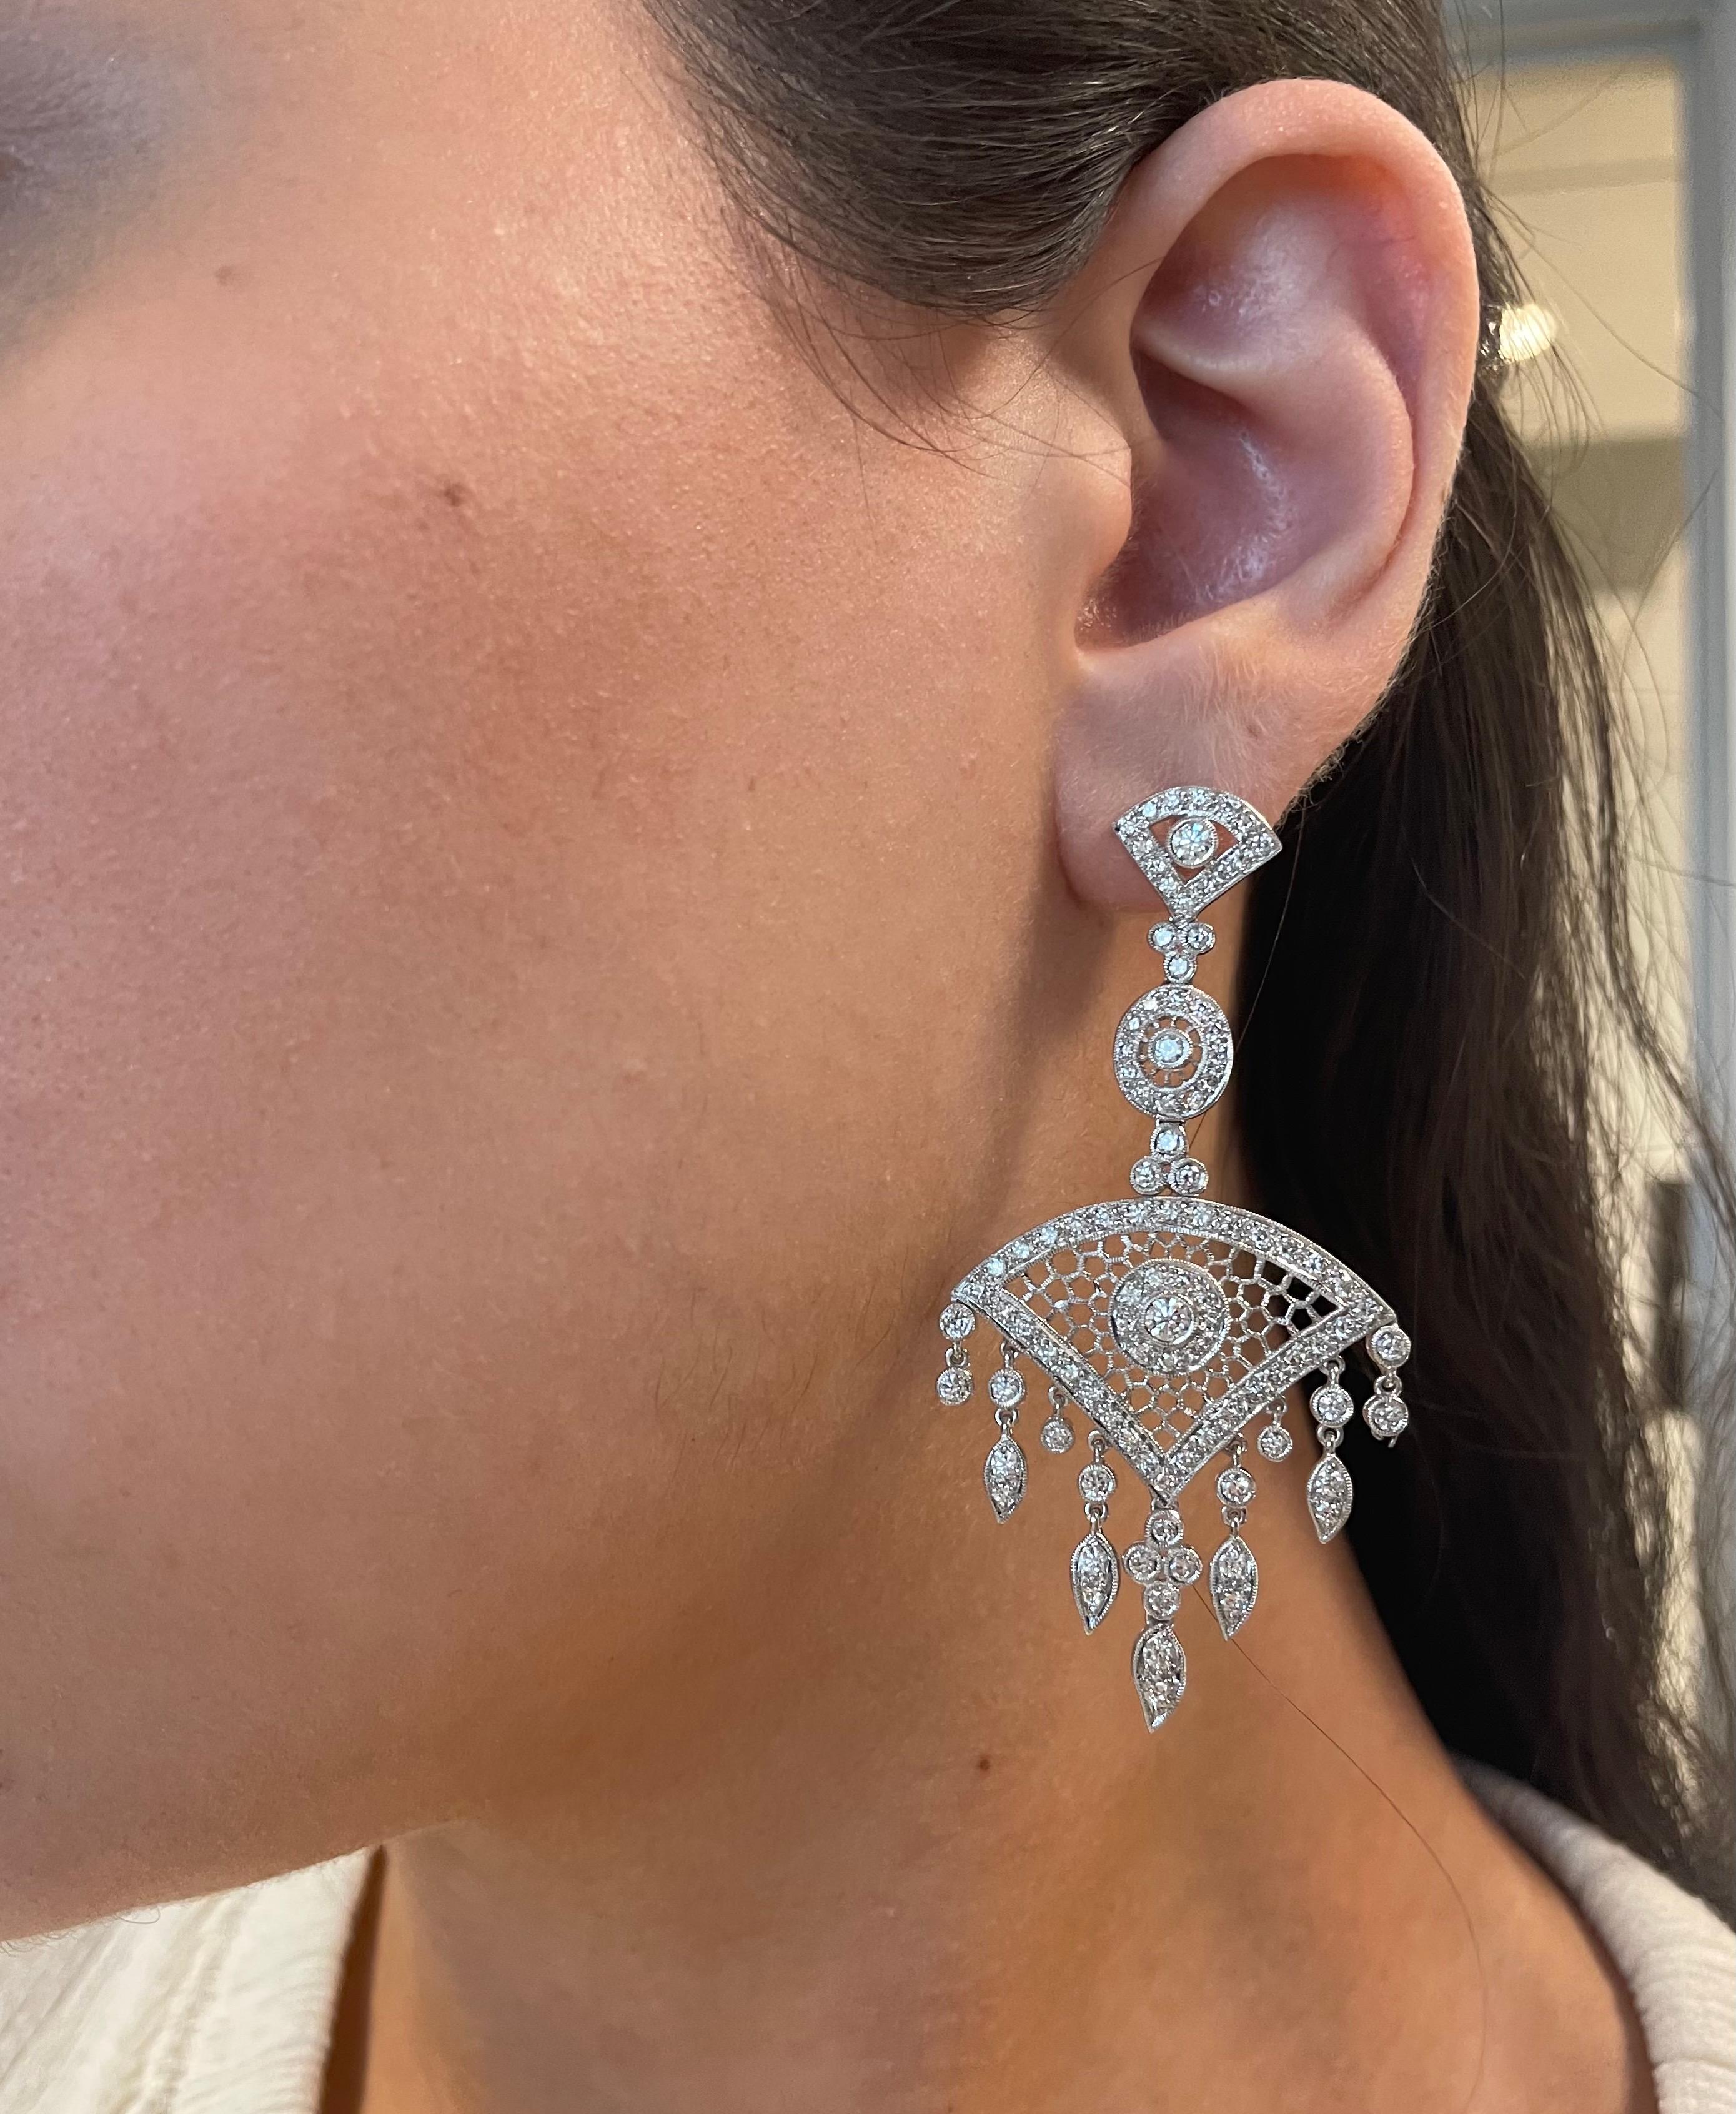 Stunning Edwardian inspired bezel set chandelier earrings.
200 round brilliant diamonds, 3.92 carats total. Approximately G/H color grade and SI clarity grade. Bezel and prong set with milgrain work, 18k white gold.
Accommodated with an up to date